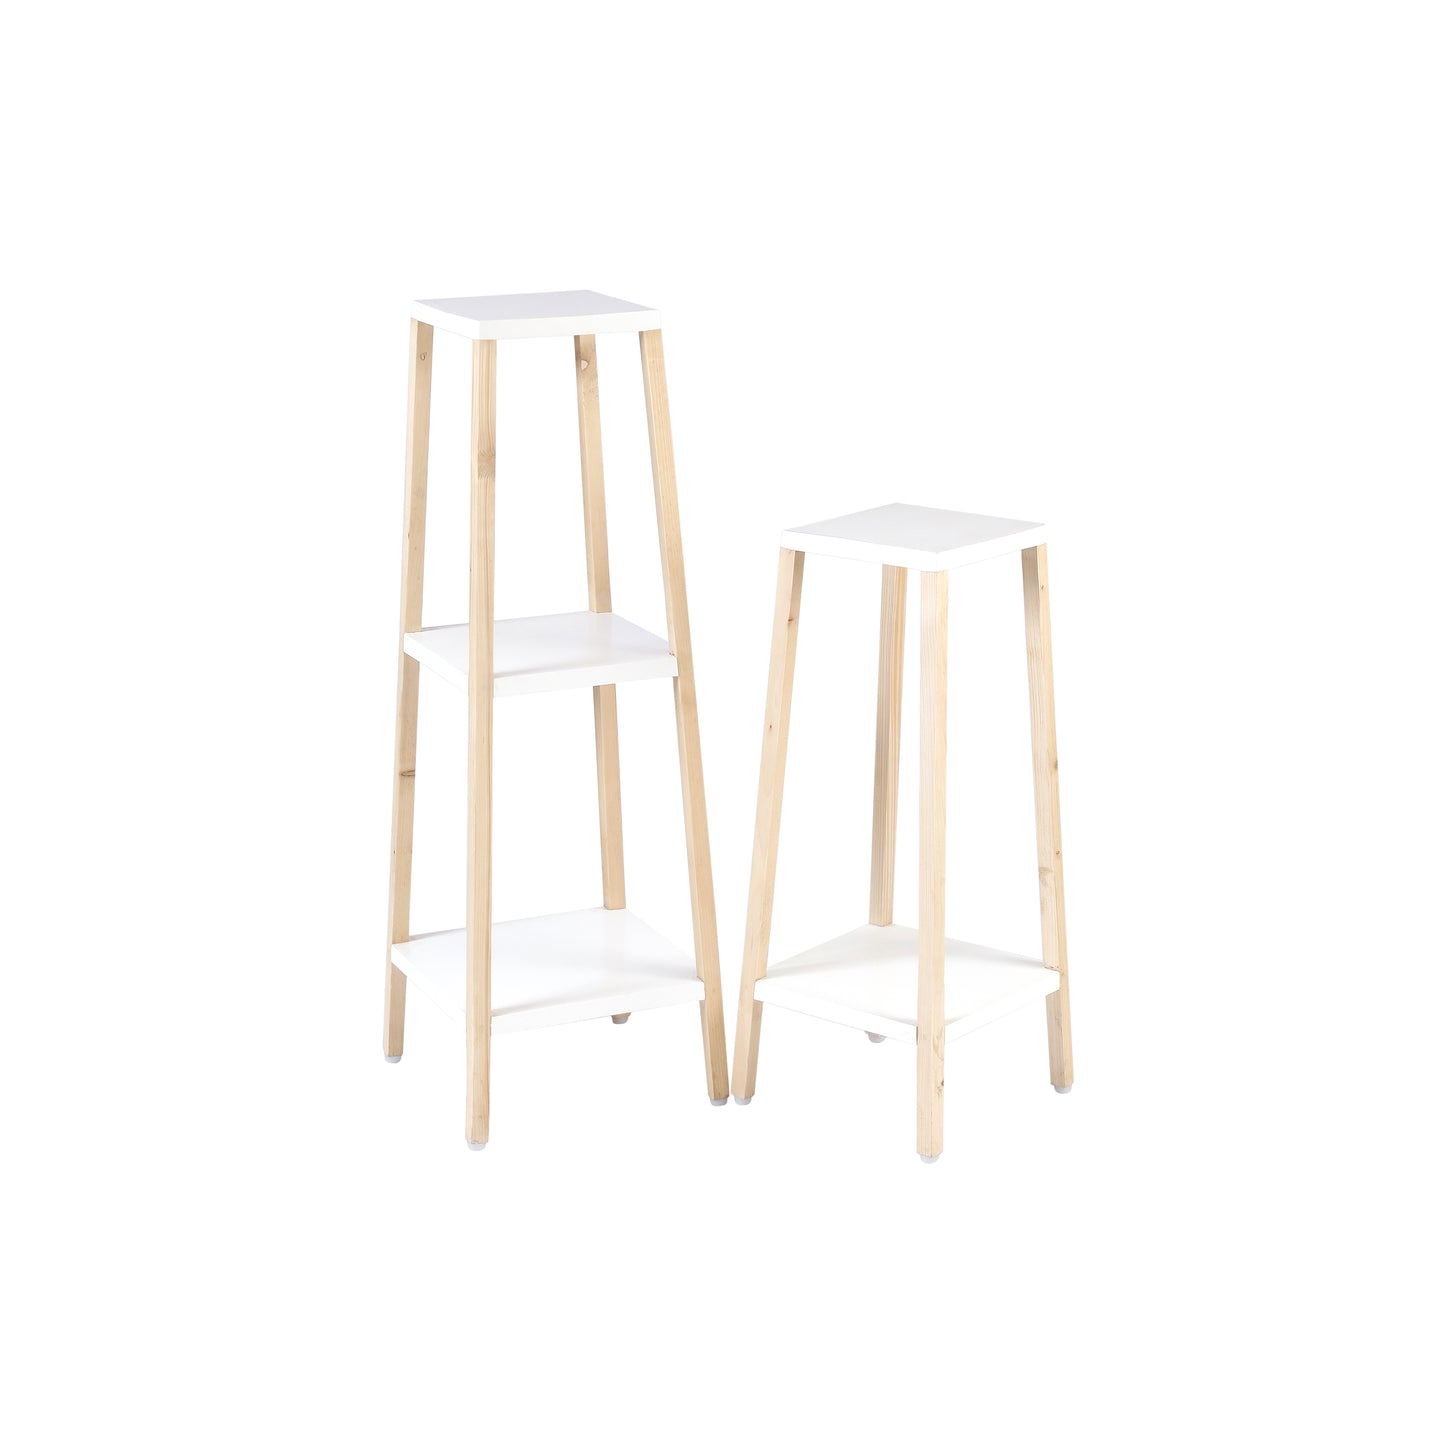 A Tiny Mistake Square Four Legged Tapering Three Tier Decorative Stand (Three Tiers) (White Base with Light Legs)